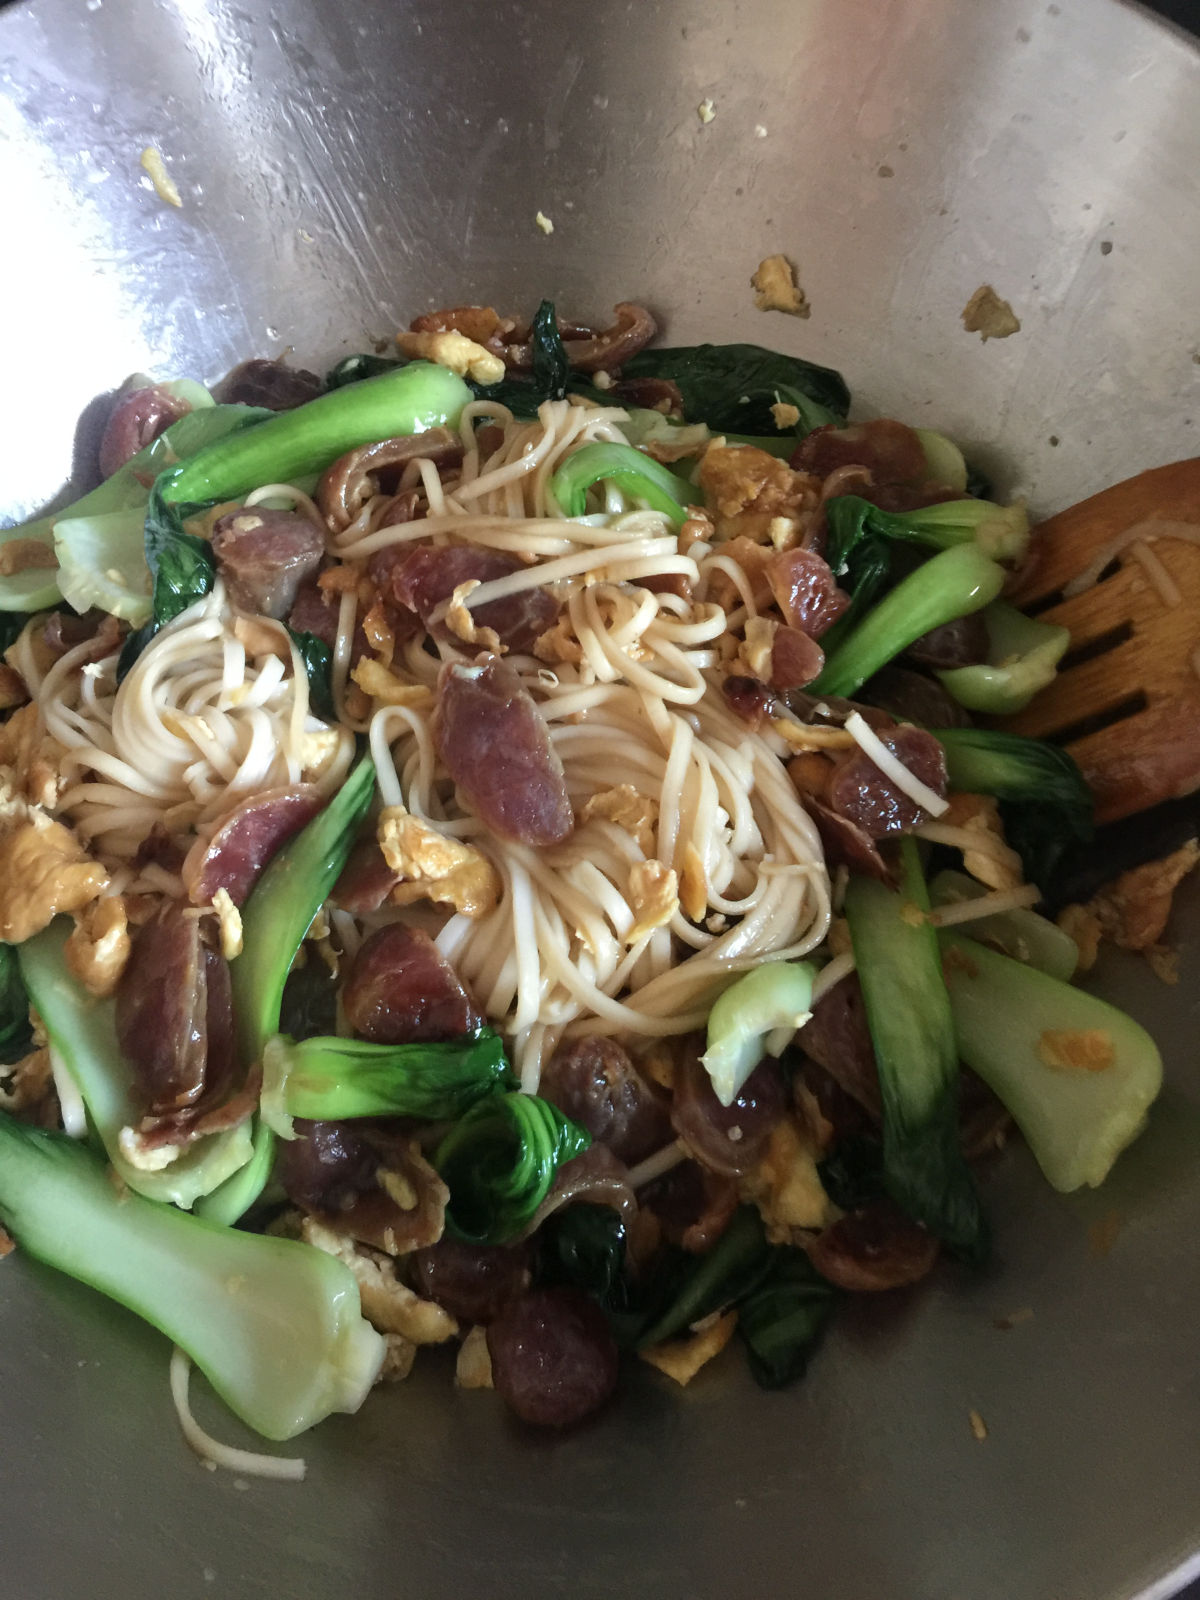 Noodles cooked with bok choy, eggs and sausages in wok with wooden spatula on the side.